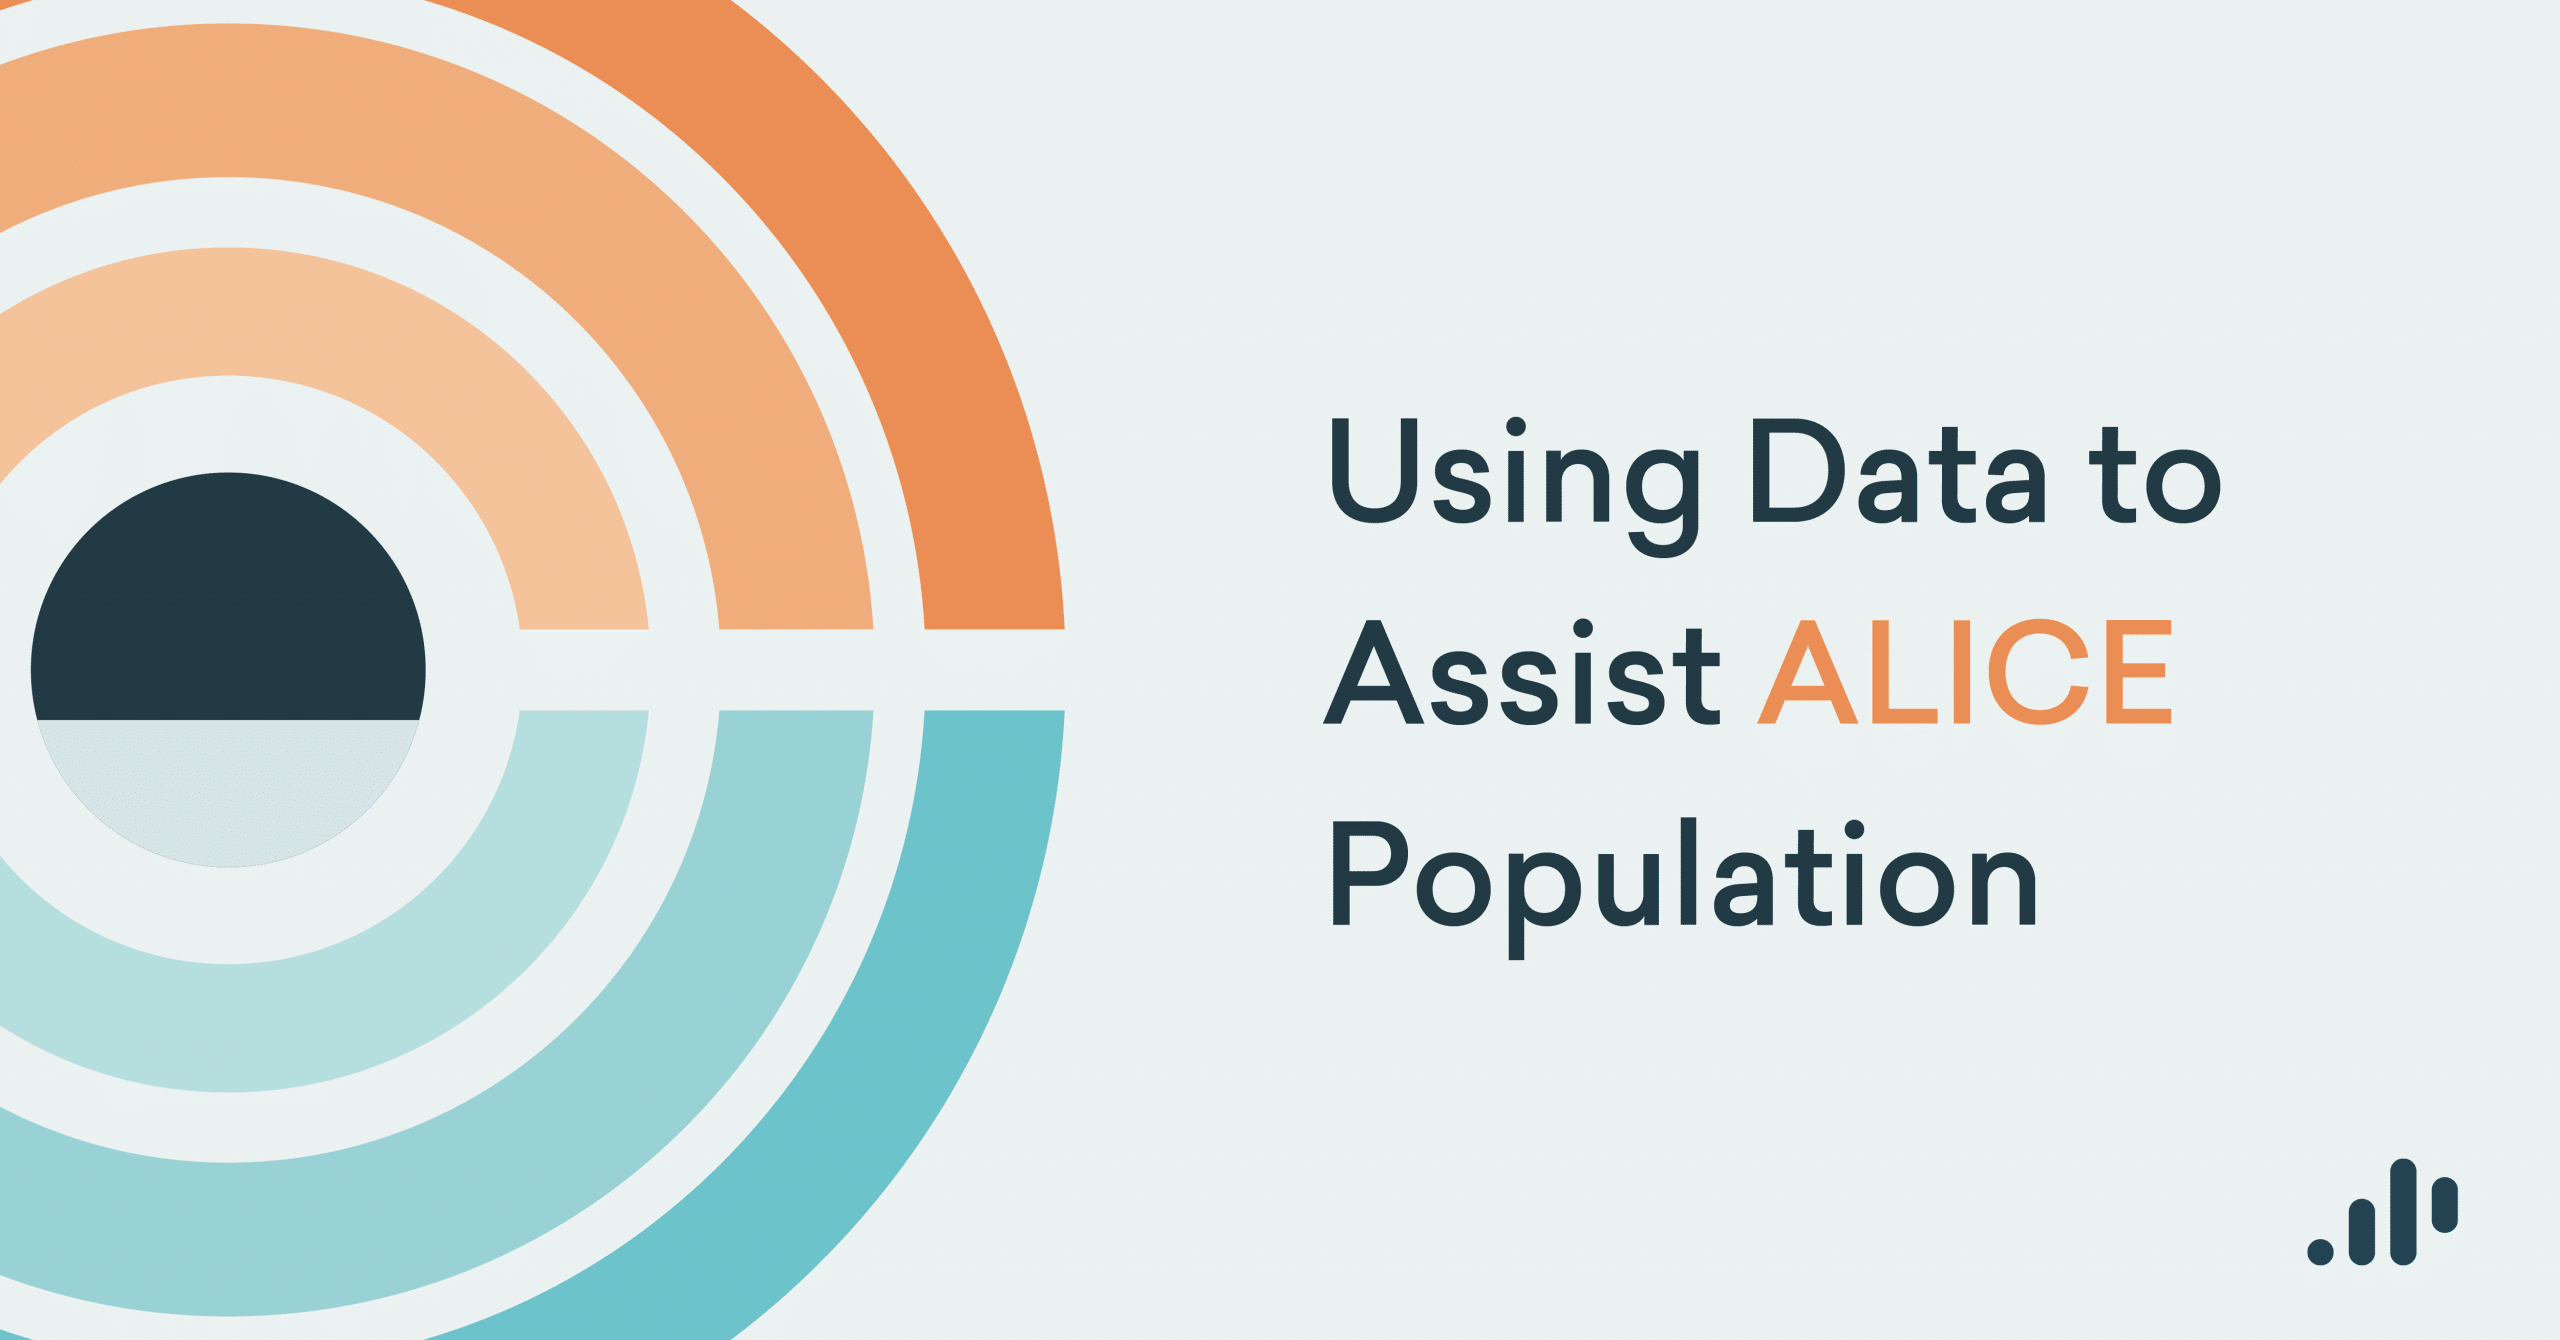 Using Data to Help the ALICE Population Overcome Barriers